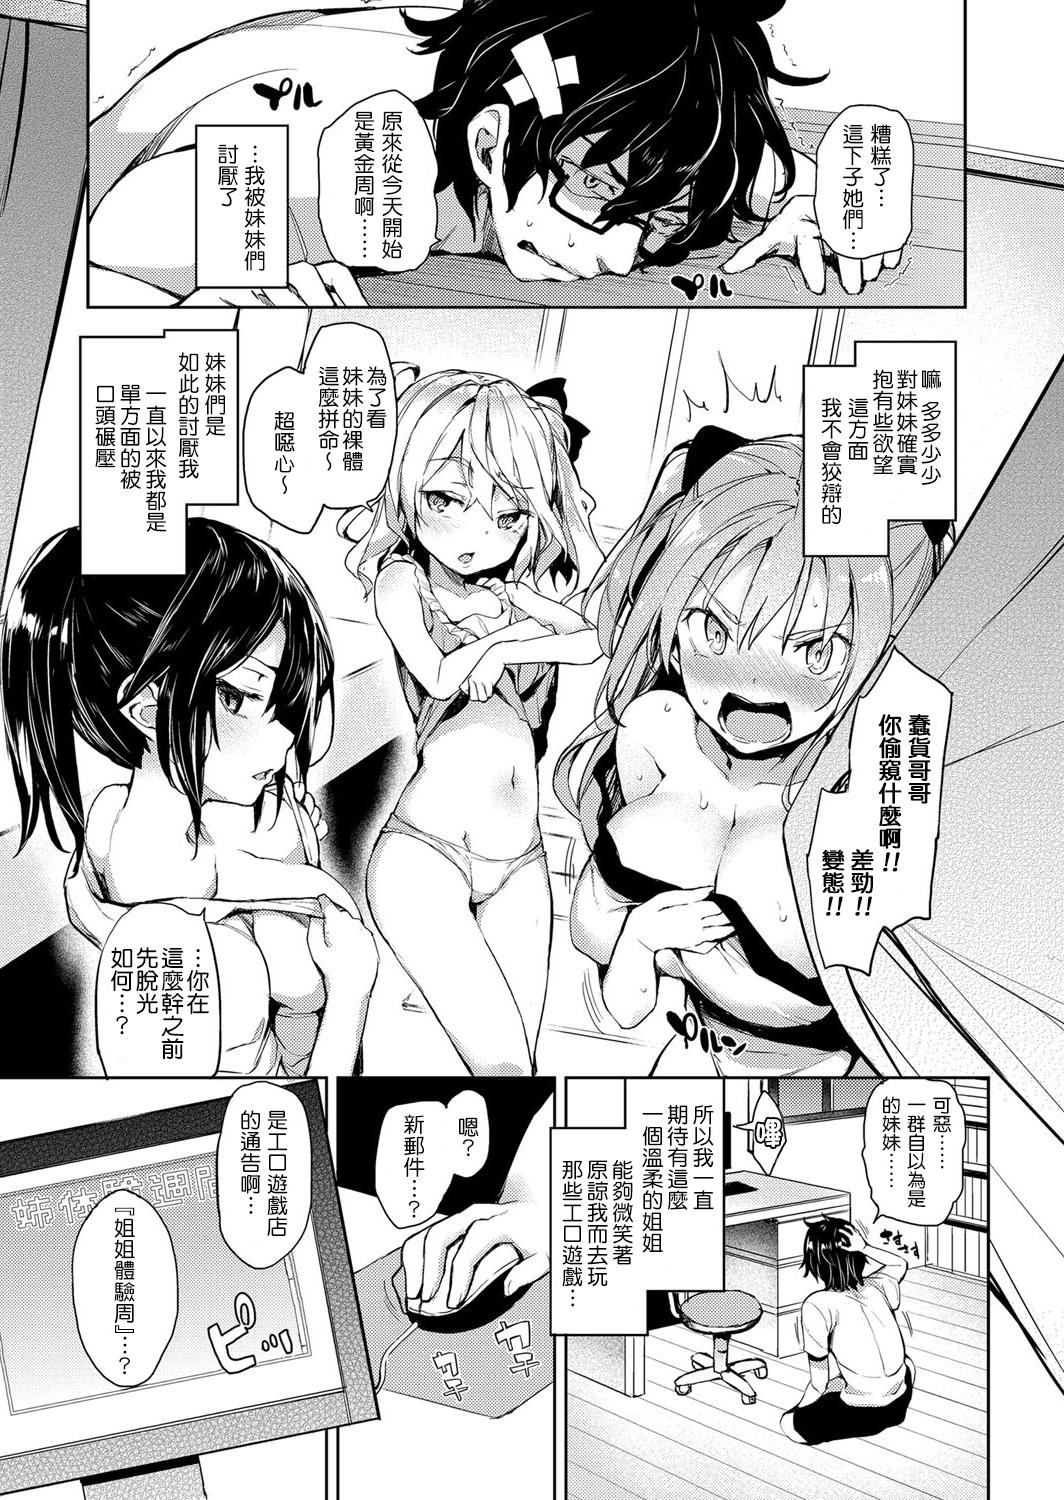 Monster 姉体驗週間 1-5 Pounding - Page 3